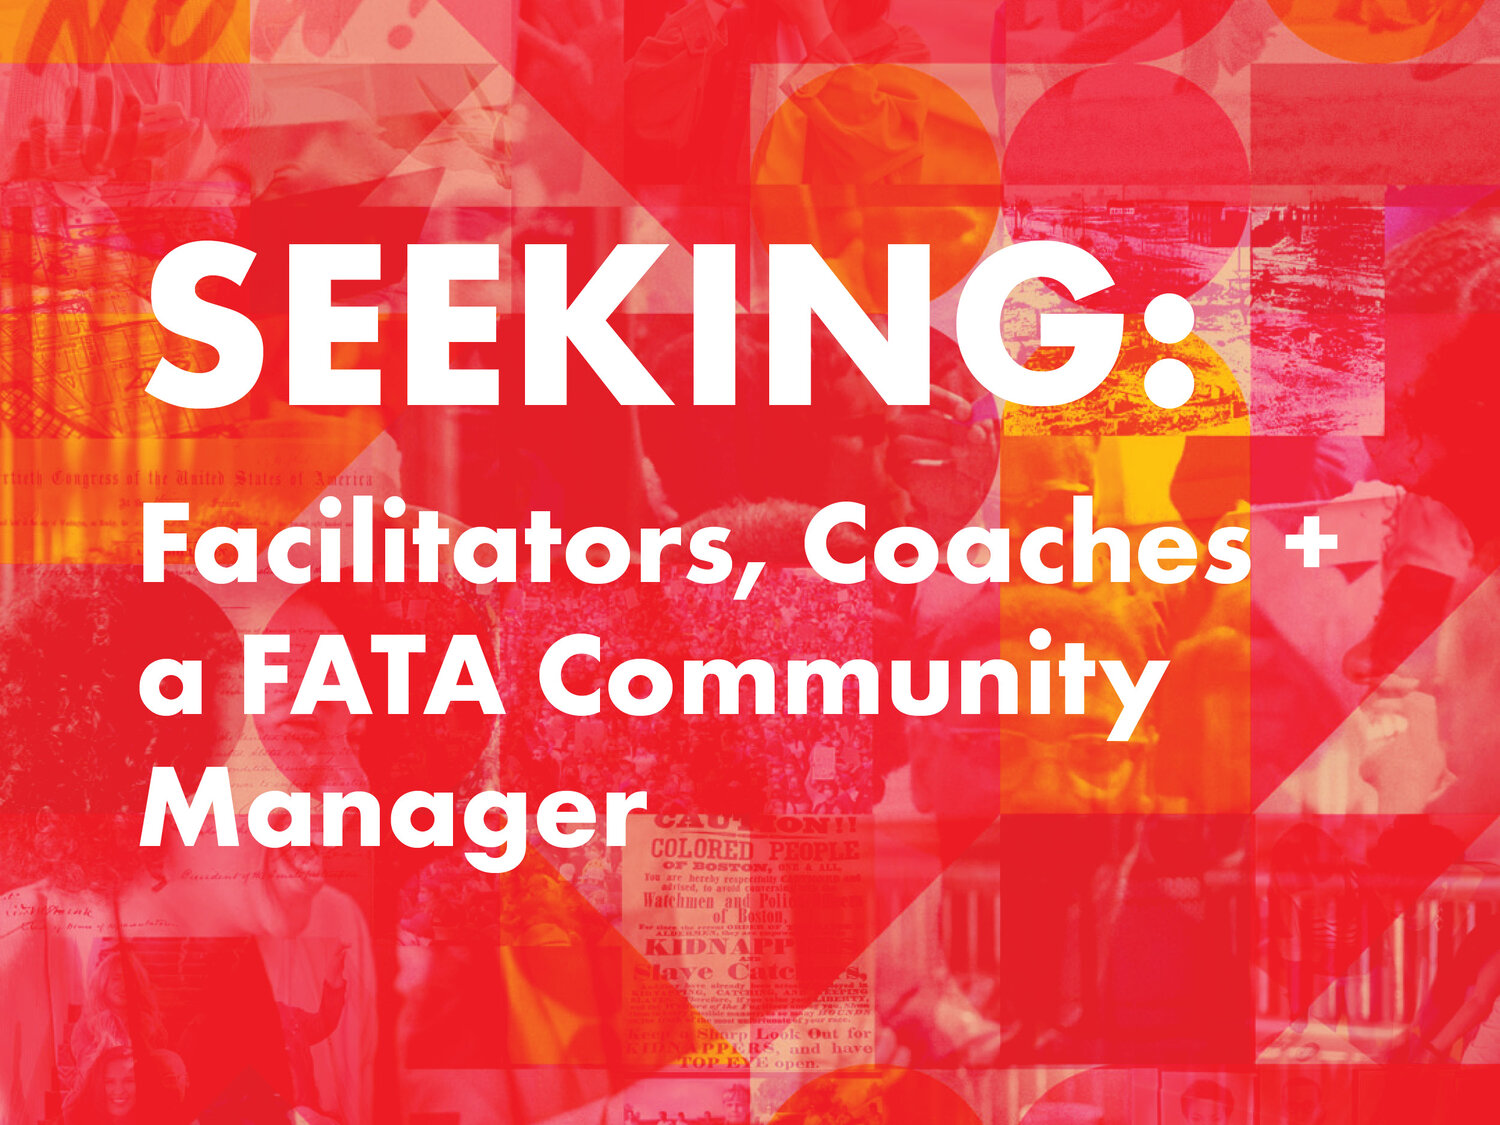 We are looking for Facilitators, Coaches + a Community Manager!